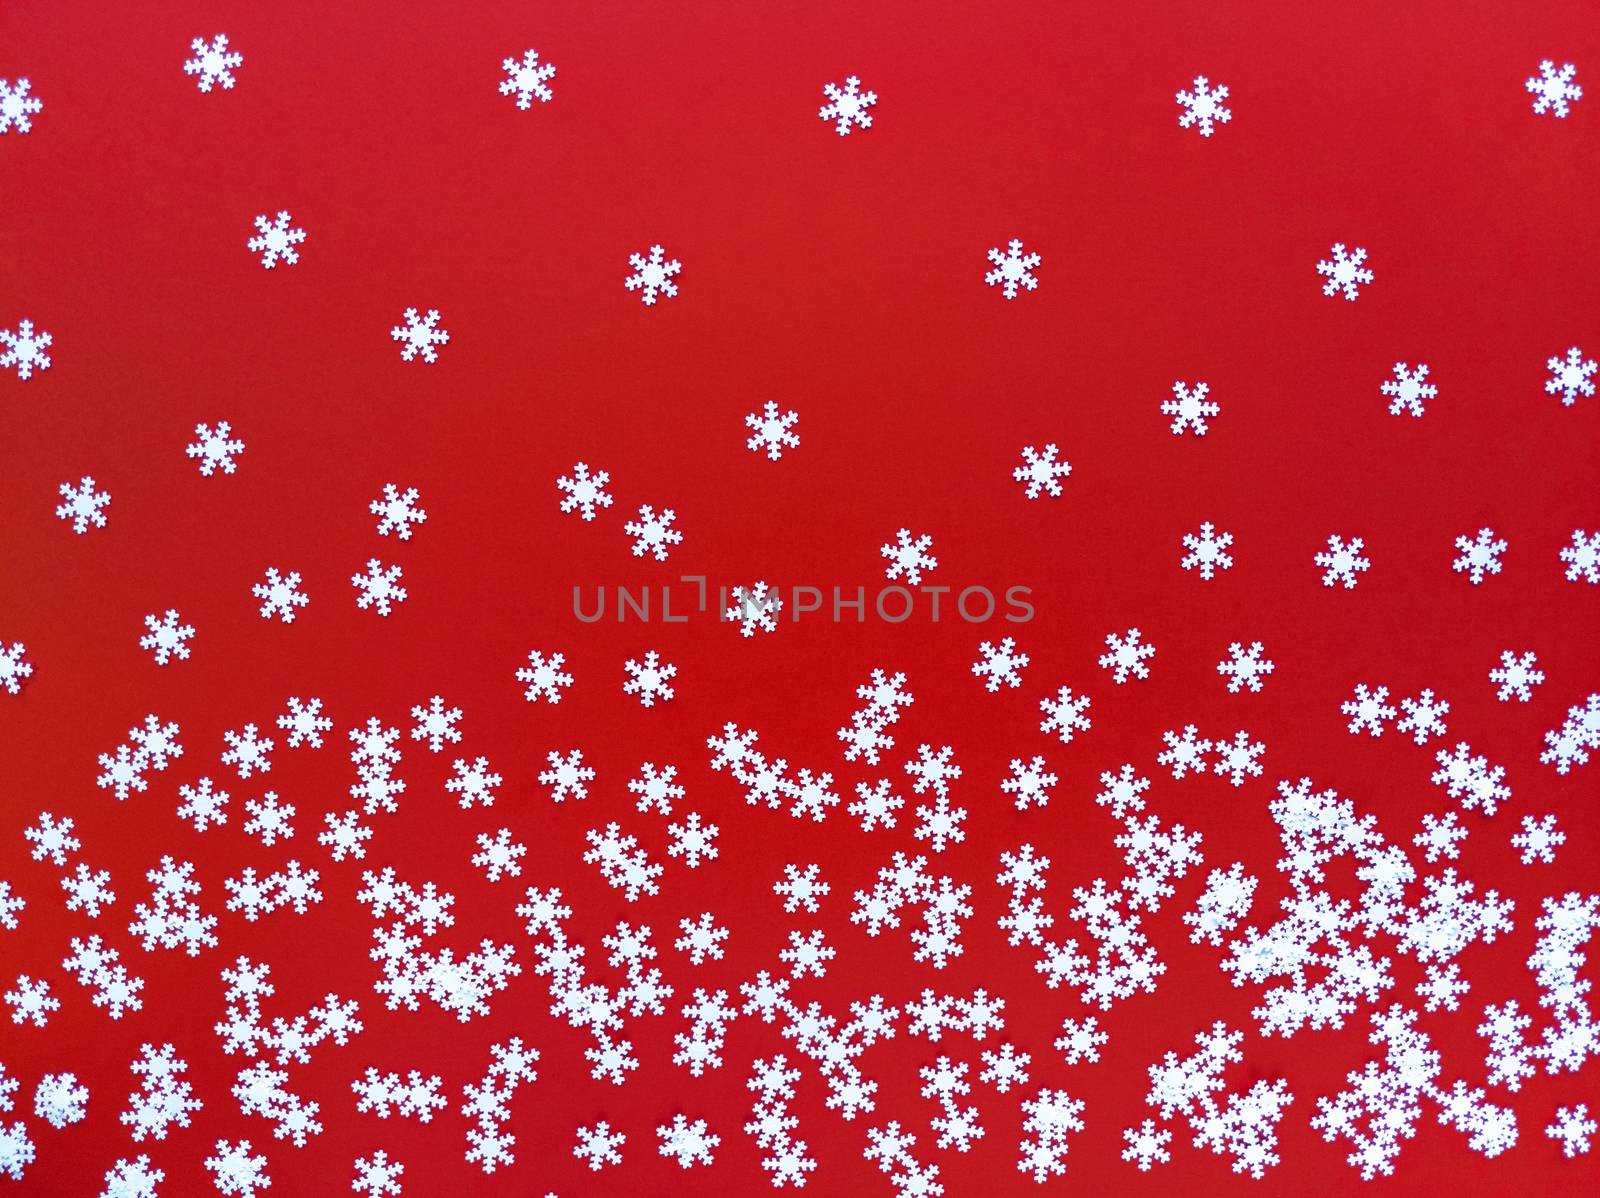 Scattered white snowflakes on red background. Simple festive flat lay. Stock photography.